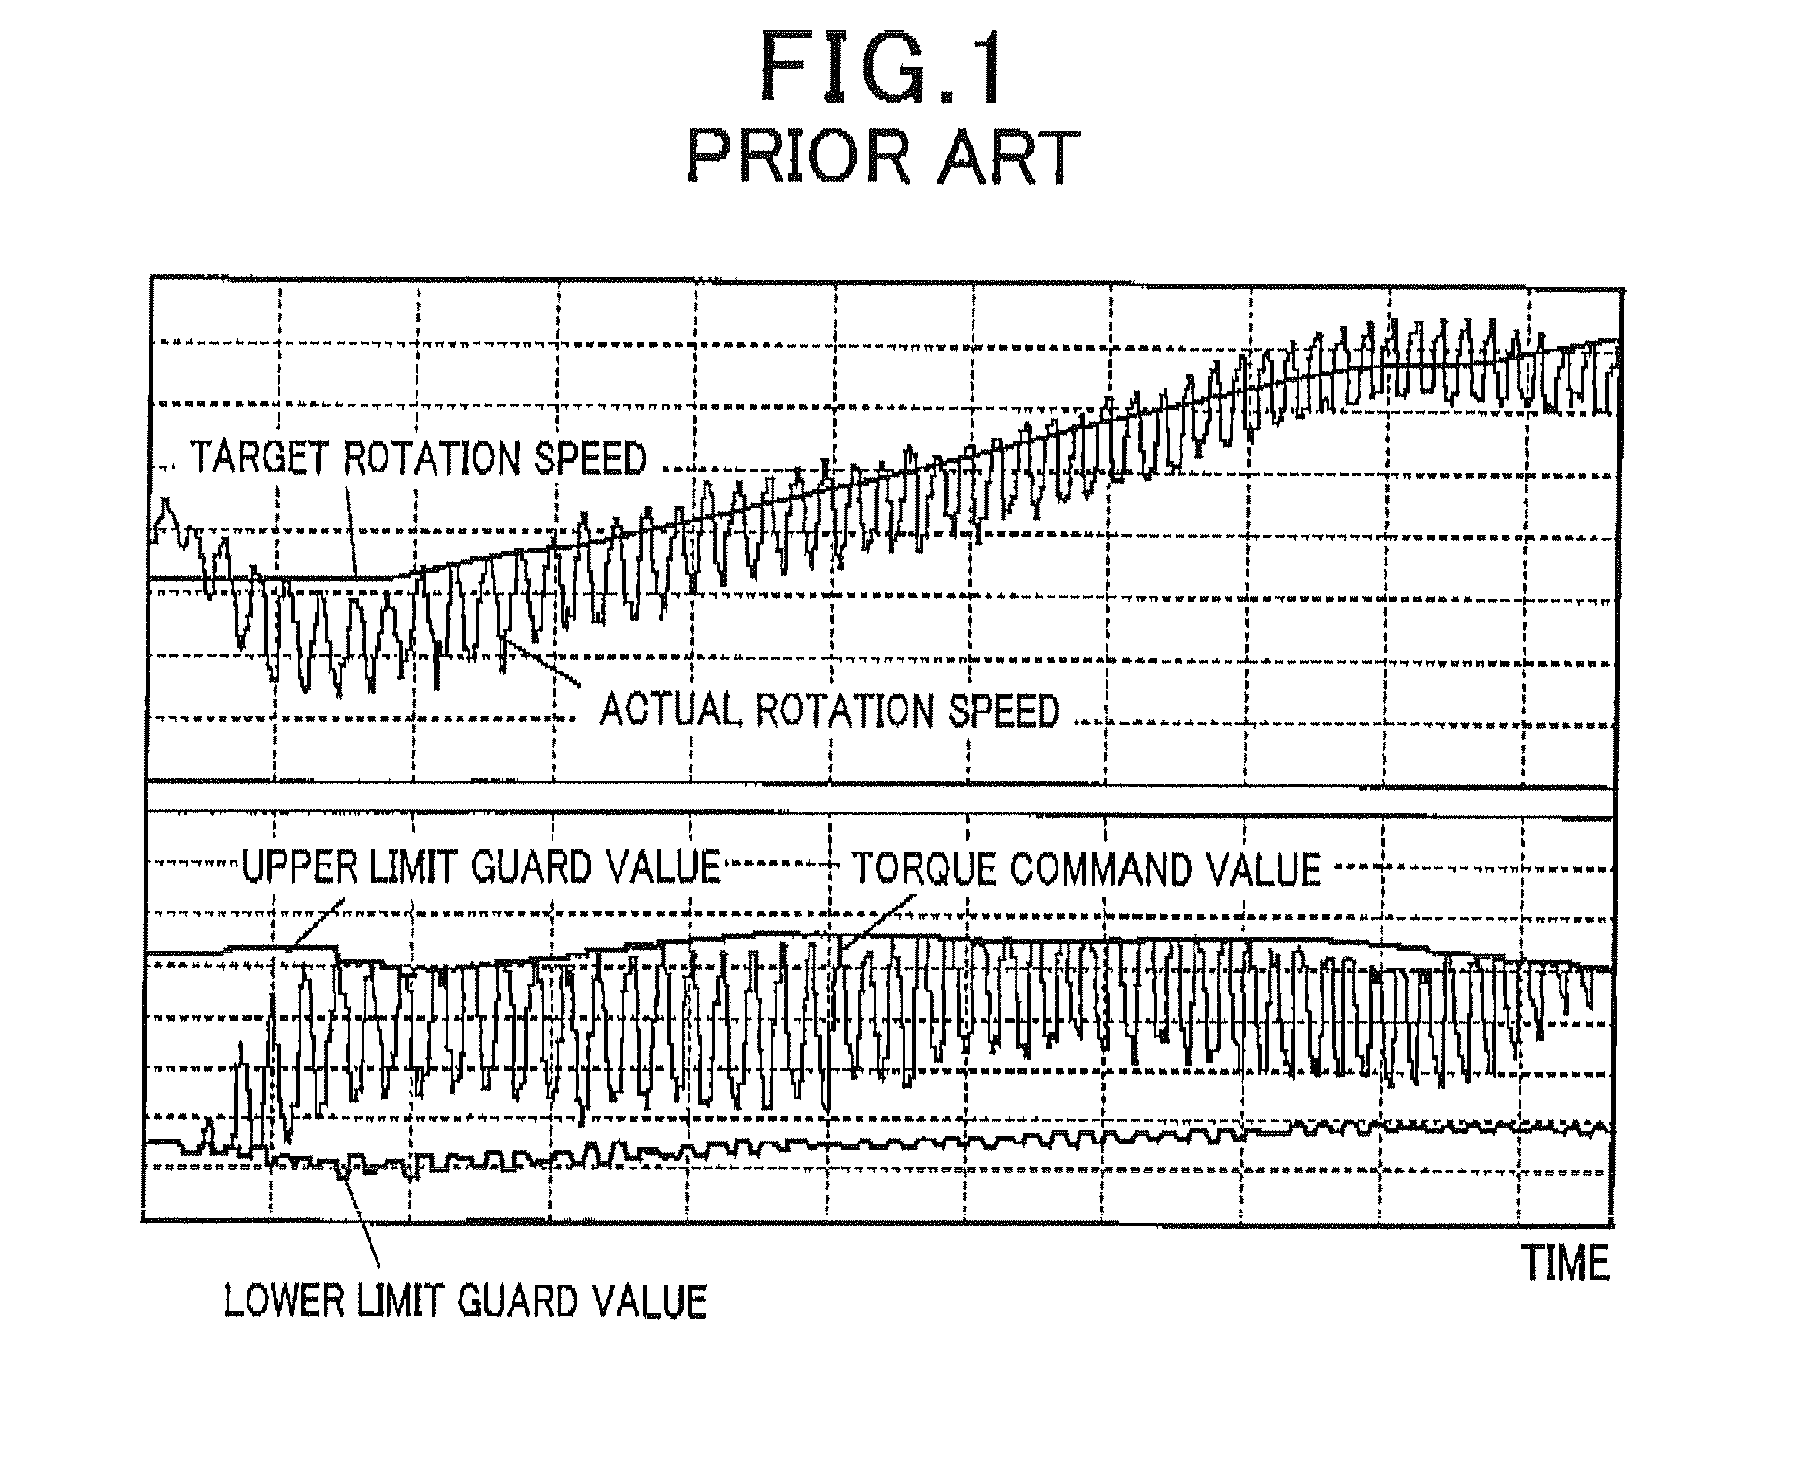 Motor control apparatus for hybrid vehicles